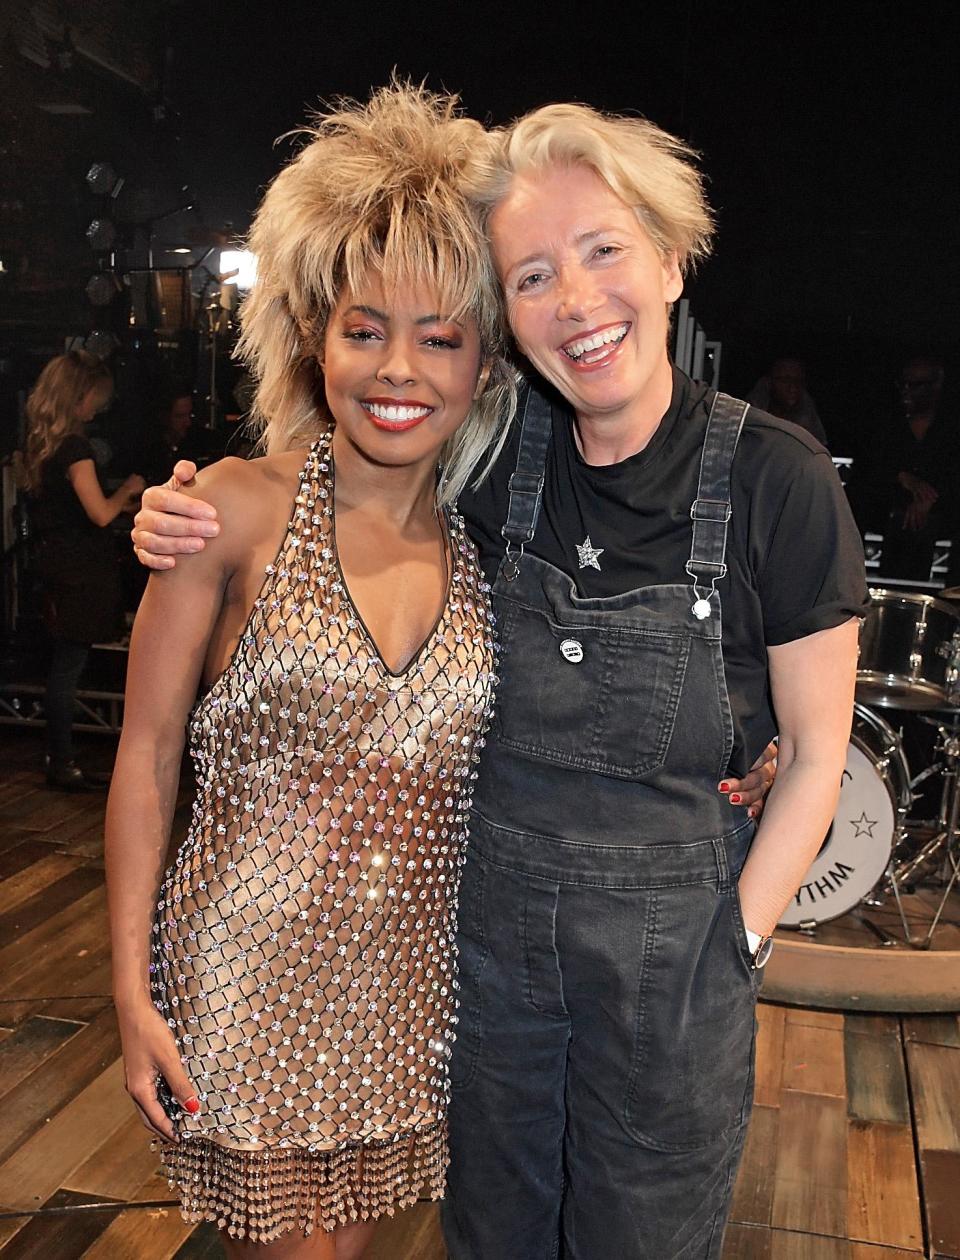 Tina tribute: Emma Thompson poses backstage with Adrienne Warren (Dave Benett/Getty Images )